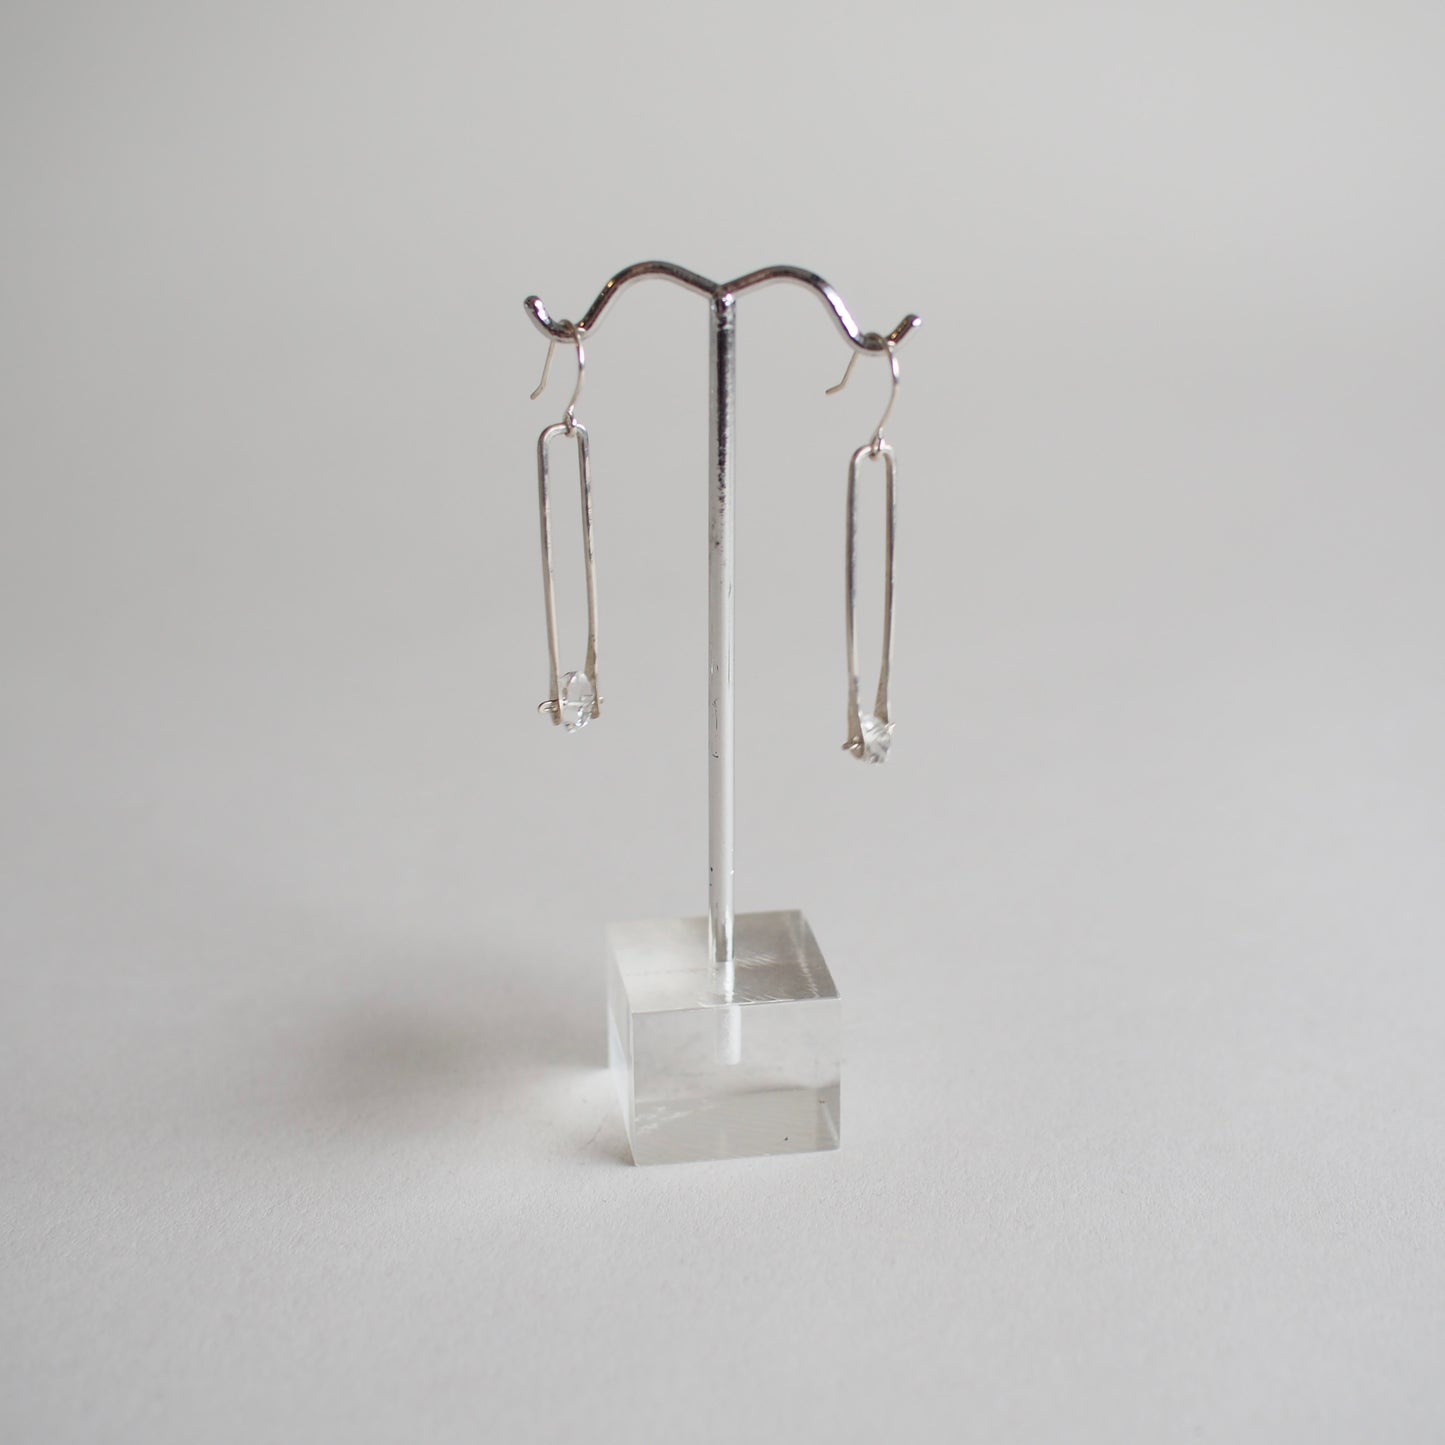 Minimalist silver frame crystal earrings by Iron Oxide